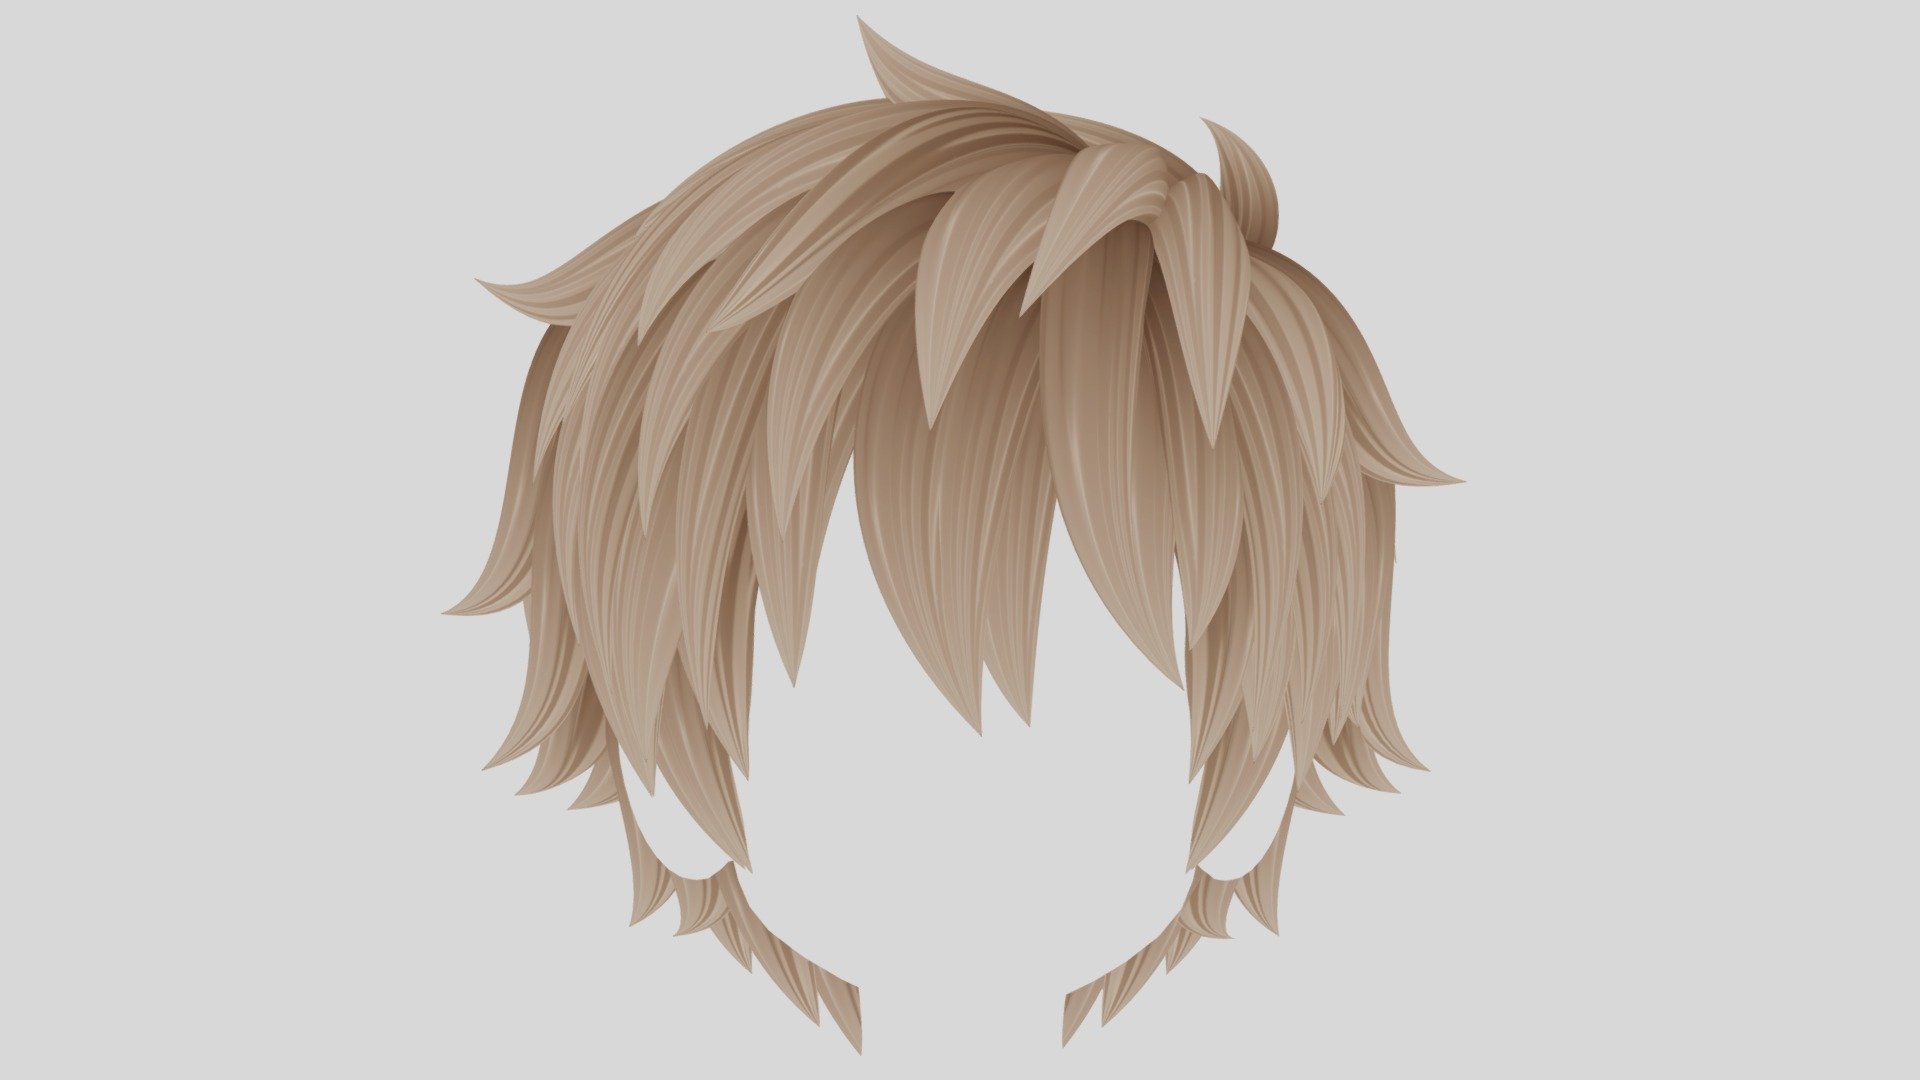 Editable bezier curves based hair ready to be converted into mesh. Includes the bevel object to modelate the bevel shape and thickness of the hair if required. Material is set to a basic texture file, but color is easily customizable.

💮 If you liked my work remember to Follow me and Share! 🧸 💬 Commissions Open: ko-fi.com/Tsubasa_Art ☕🌸 !! - Anime Hair (Hibiya Style) - Buy Royalty Free 3D model by Tsubasa ツバサ (@Tsubasa_Art) 3d model